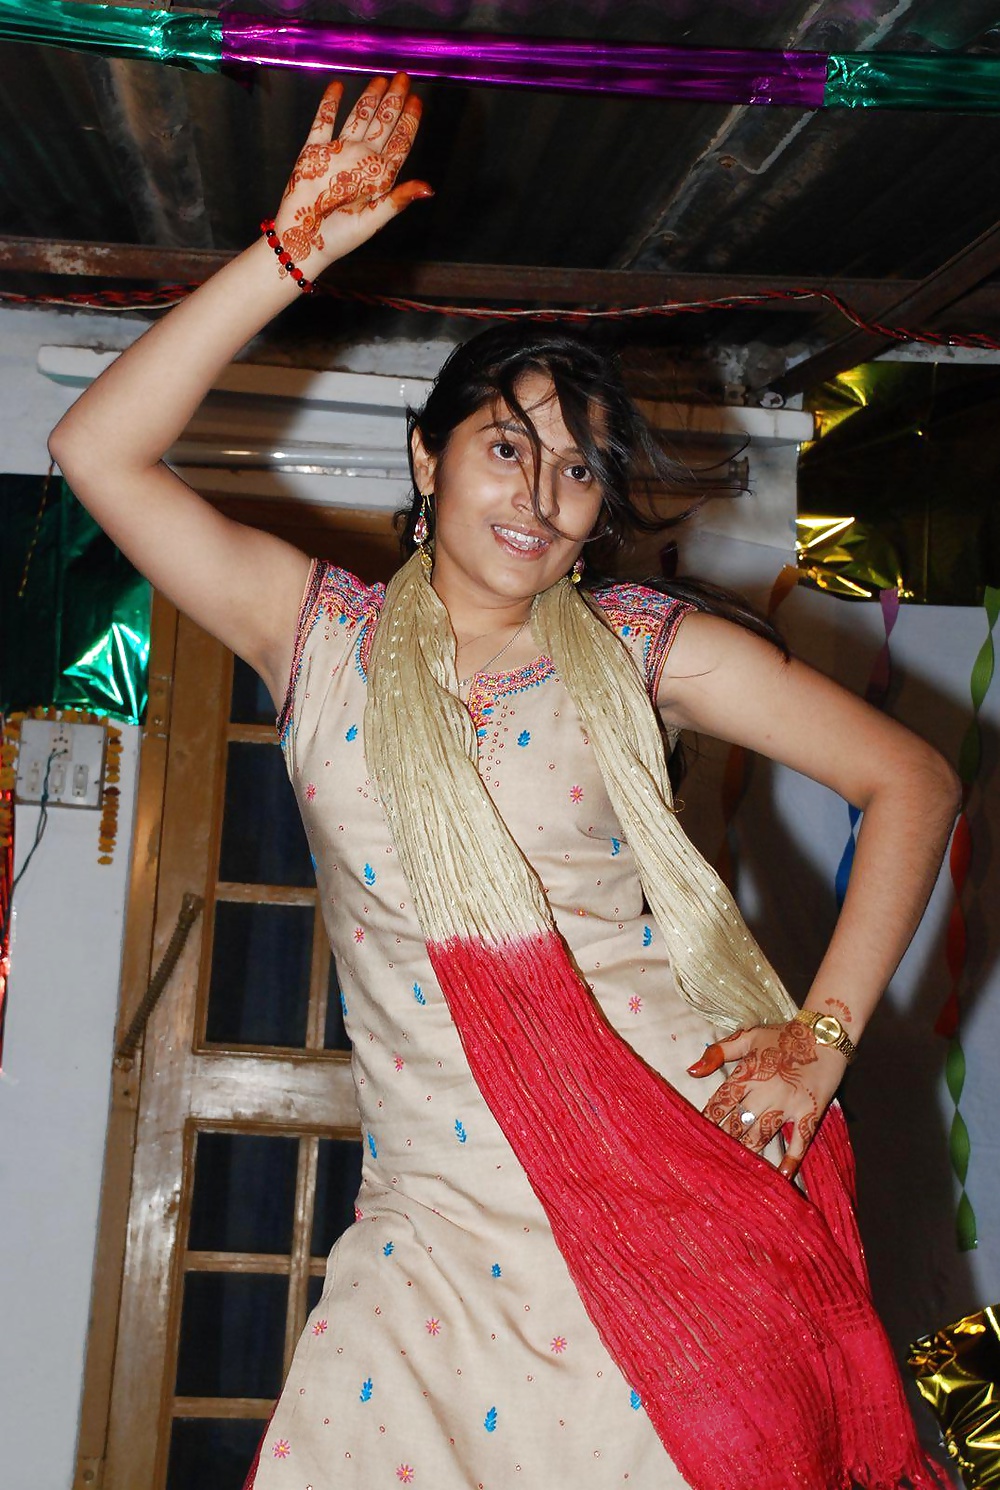 Indian Desi Smelly Sweaty Armpits Underarms for comments adult photos